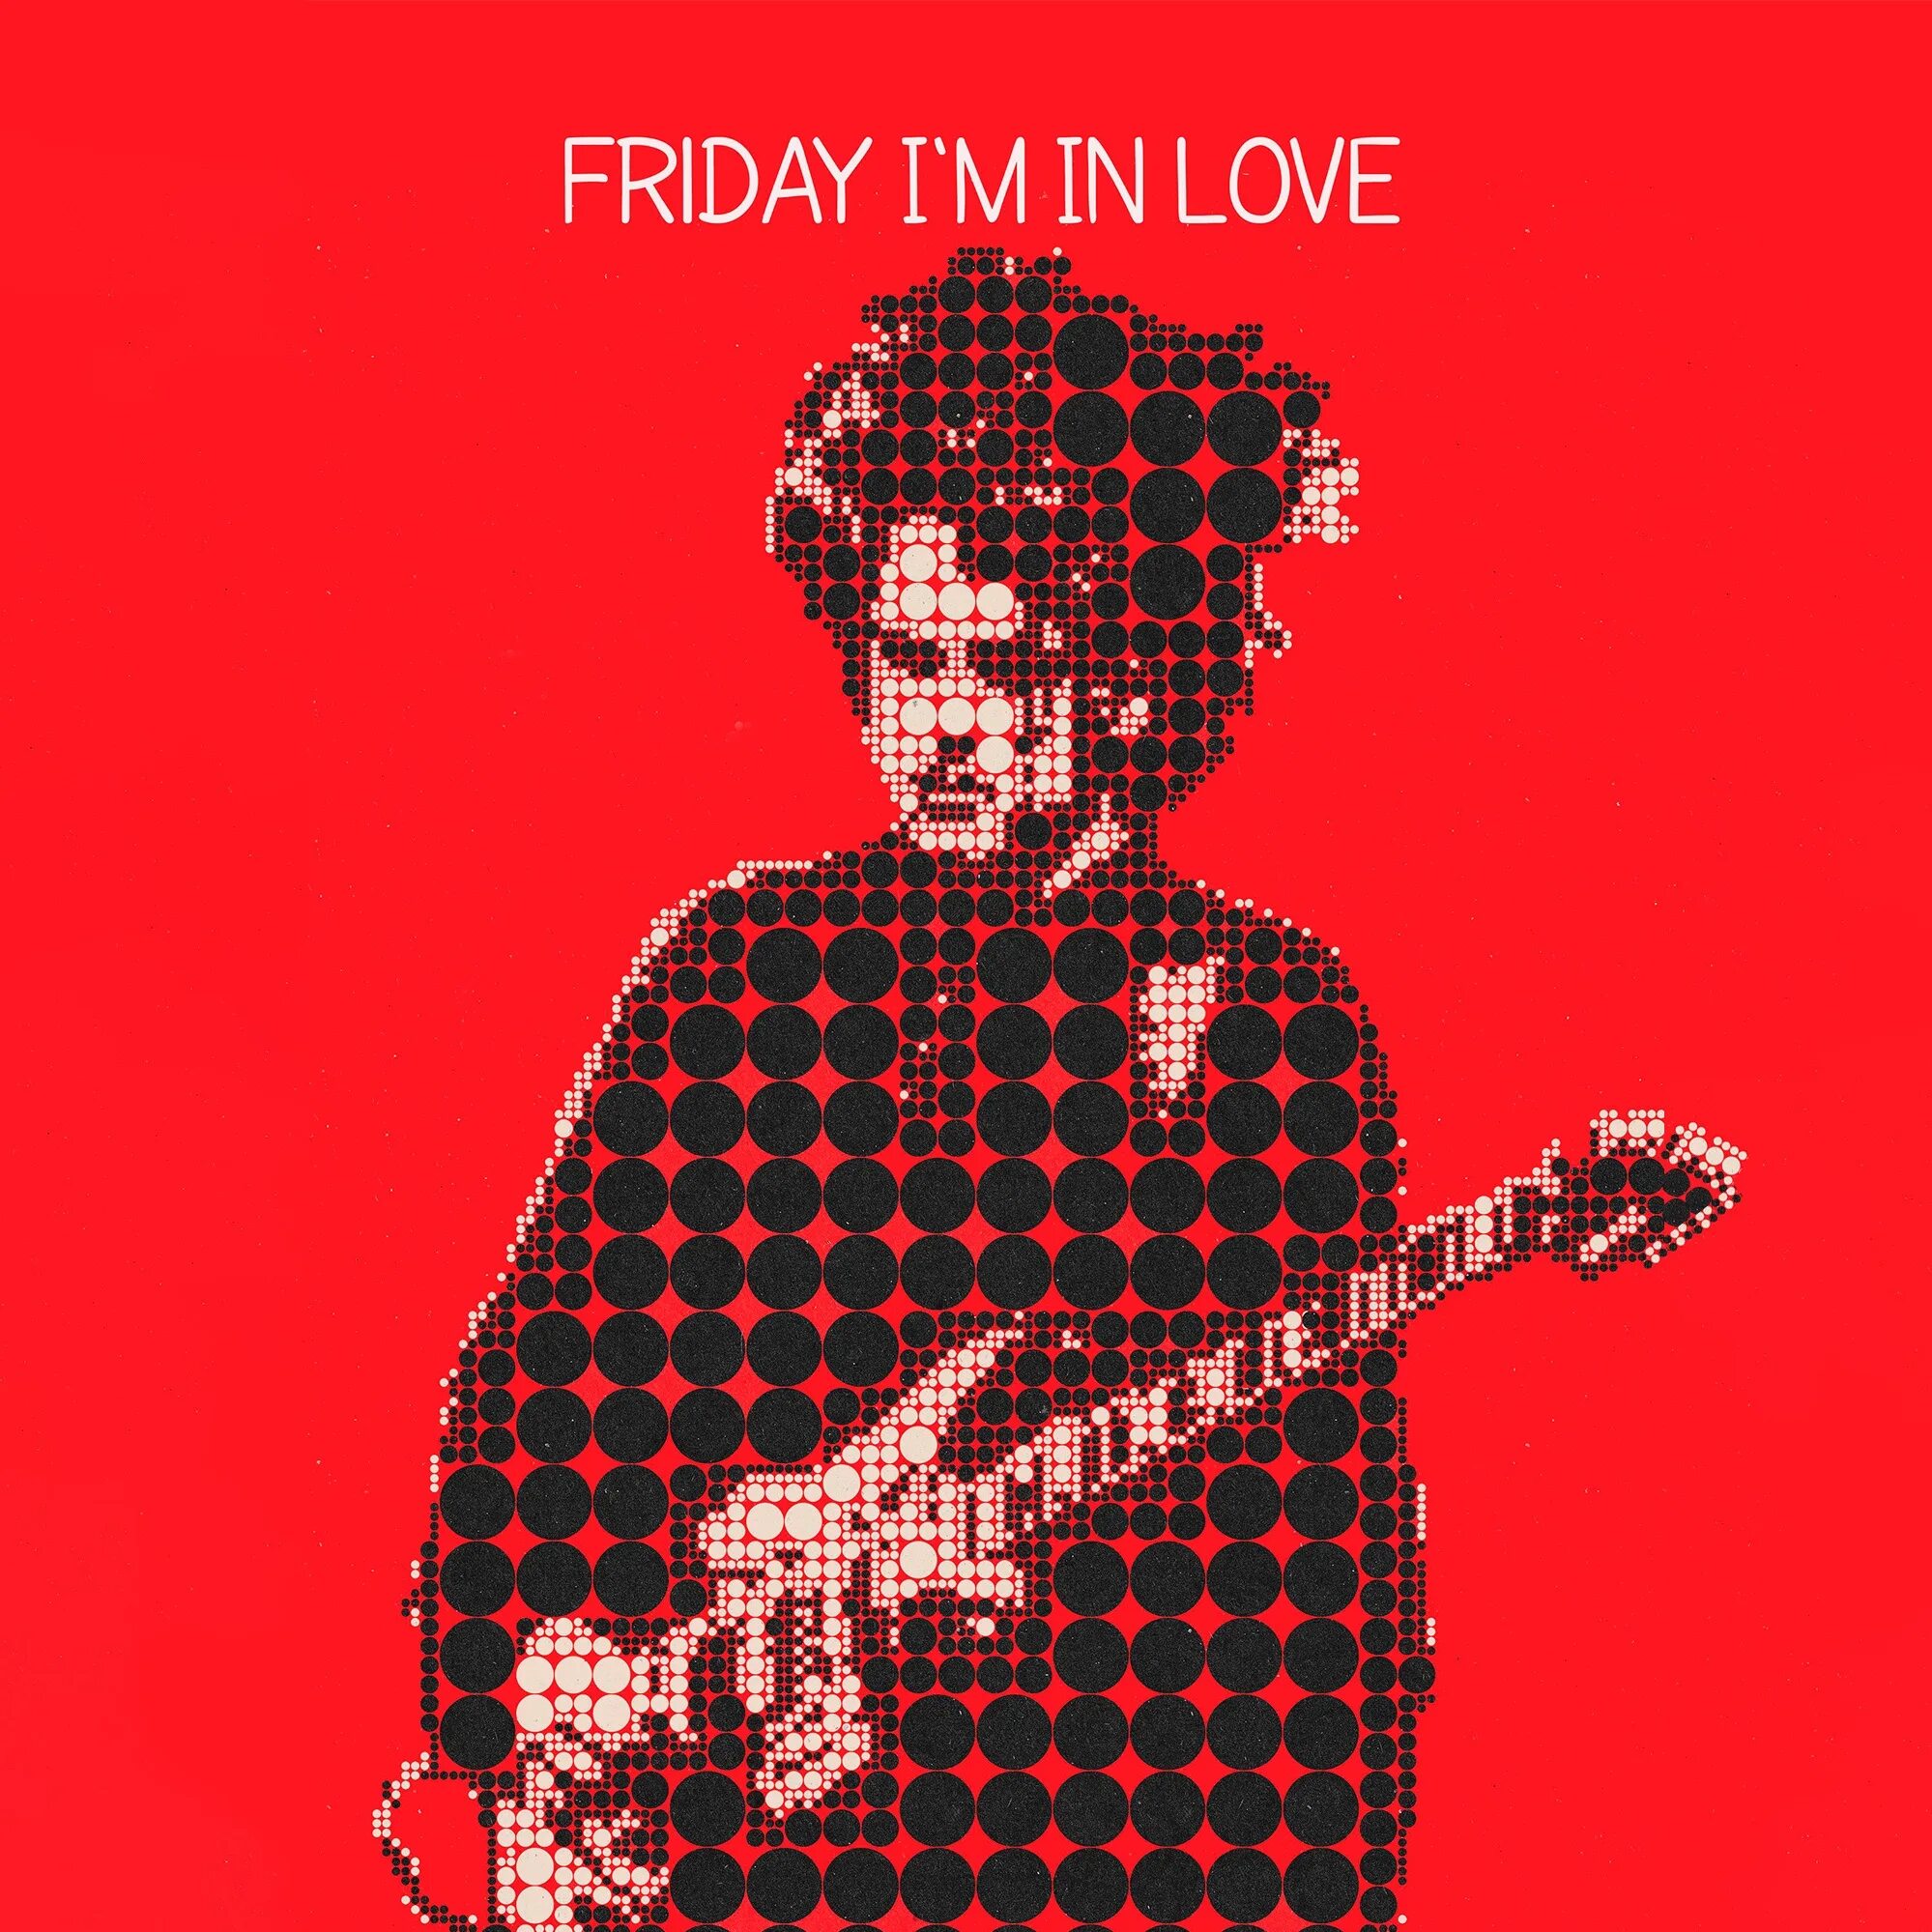 Friday i in love the cure. Friday im in Love the Cure. The Cure Friday i'm in Love бой. The Cure Friday i'm in Love логотип.